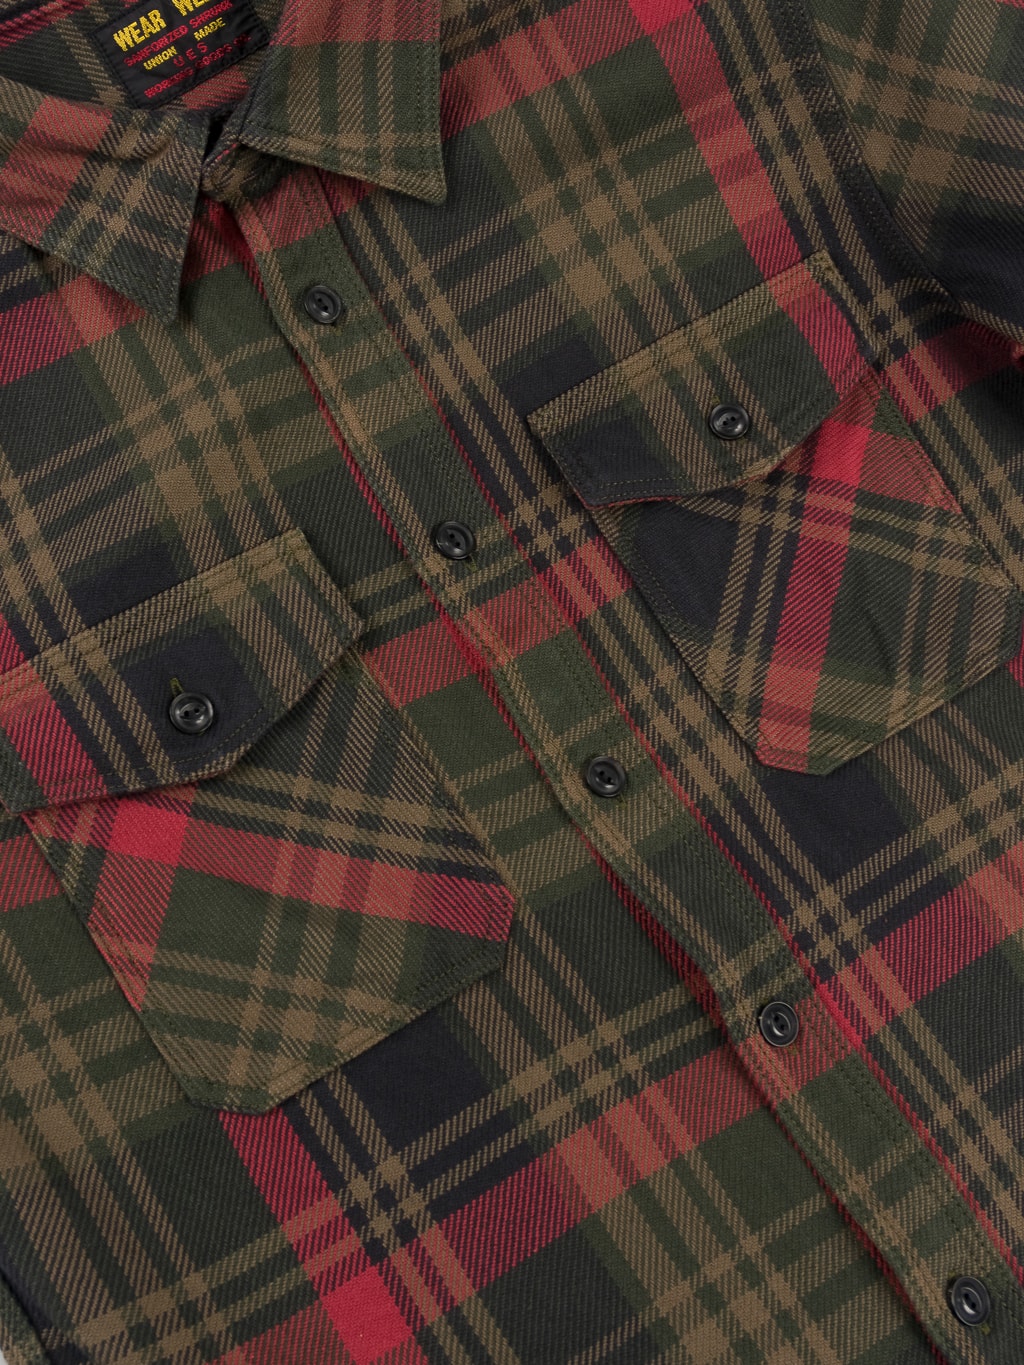 ues extra heavy selvedge flannel shirt red chest